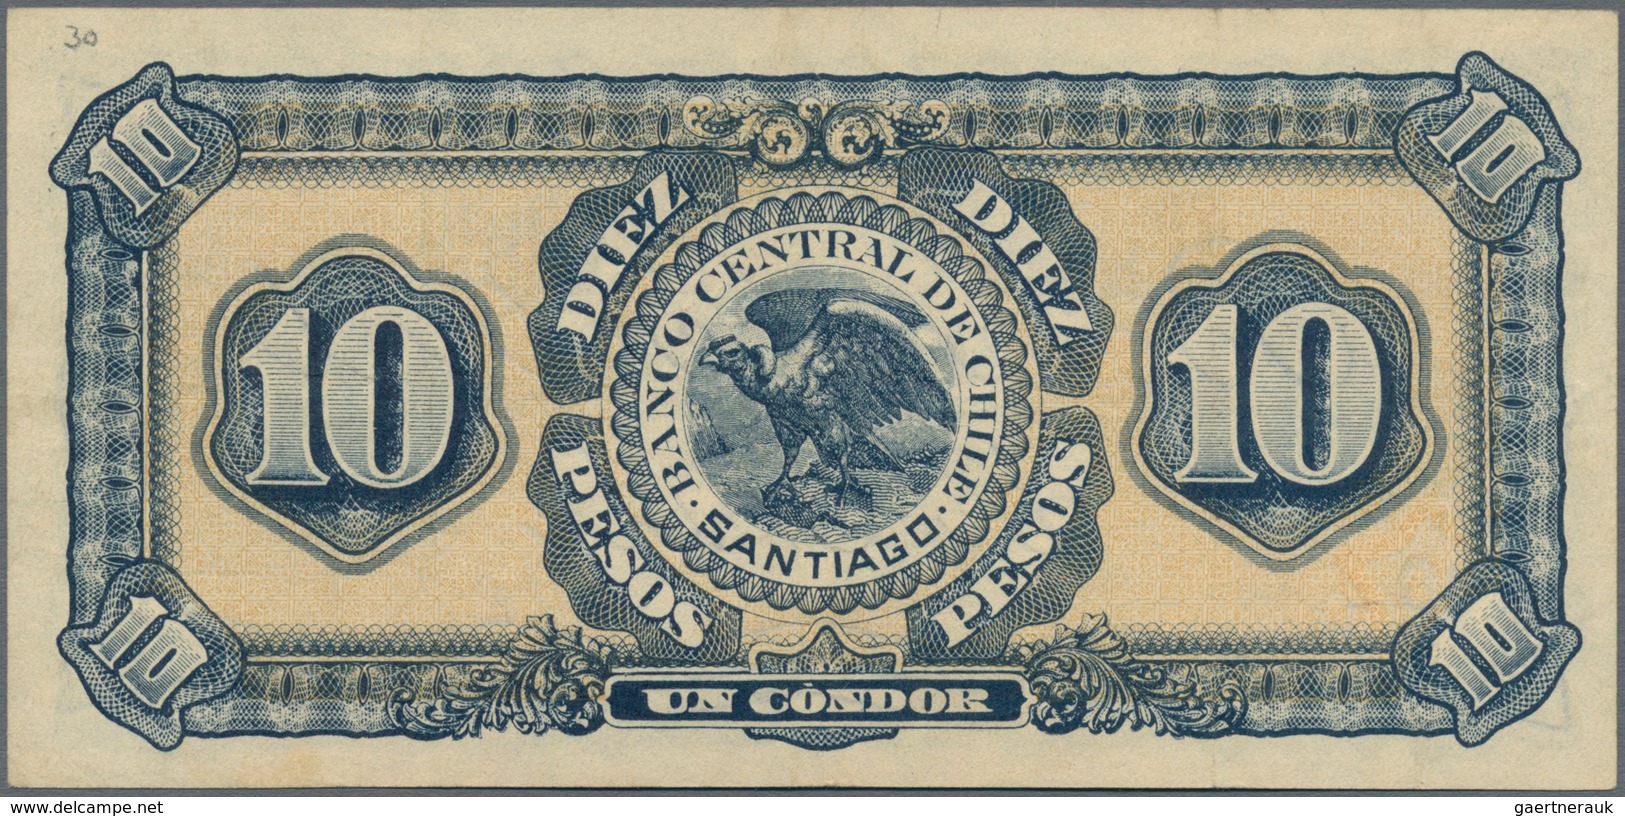 Chile: Banco Central De Chile 10 Pesos 1928, P.83b, Very Nice With A Few Soft Folds Only. Condition: - Chile